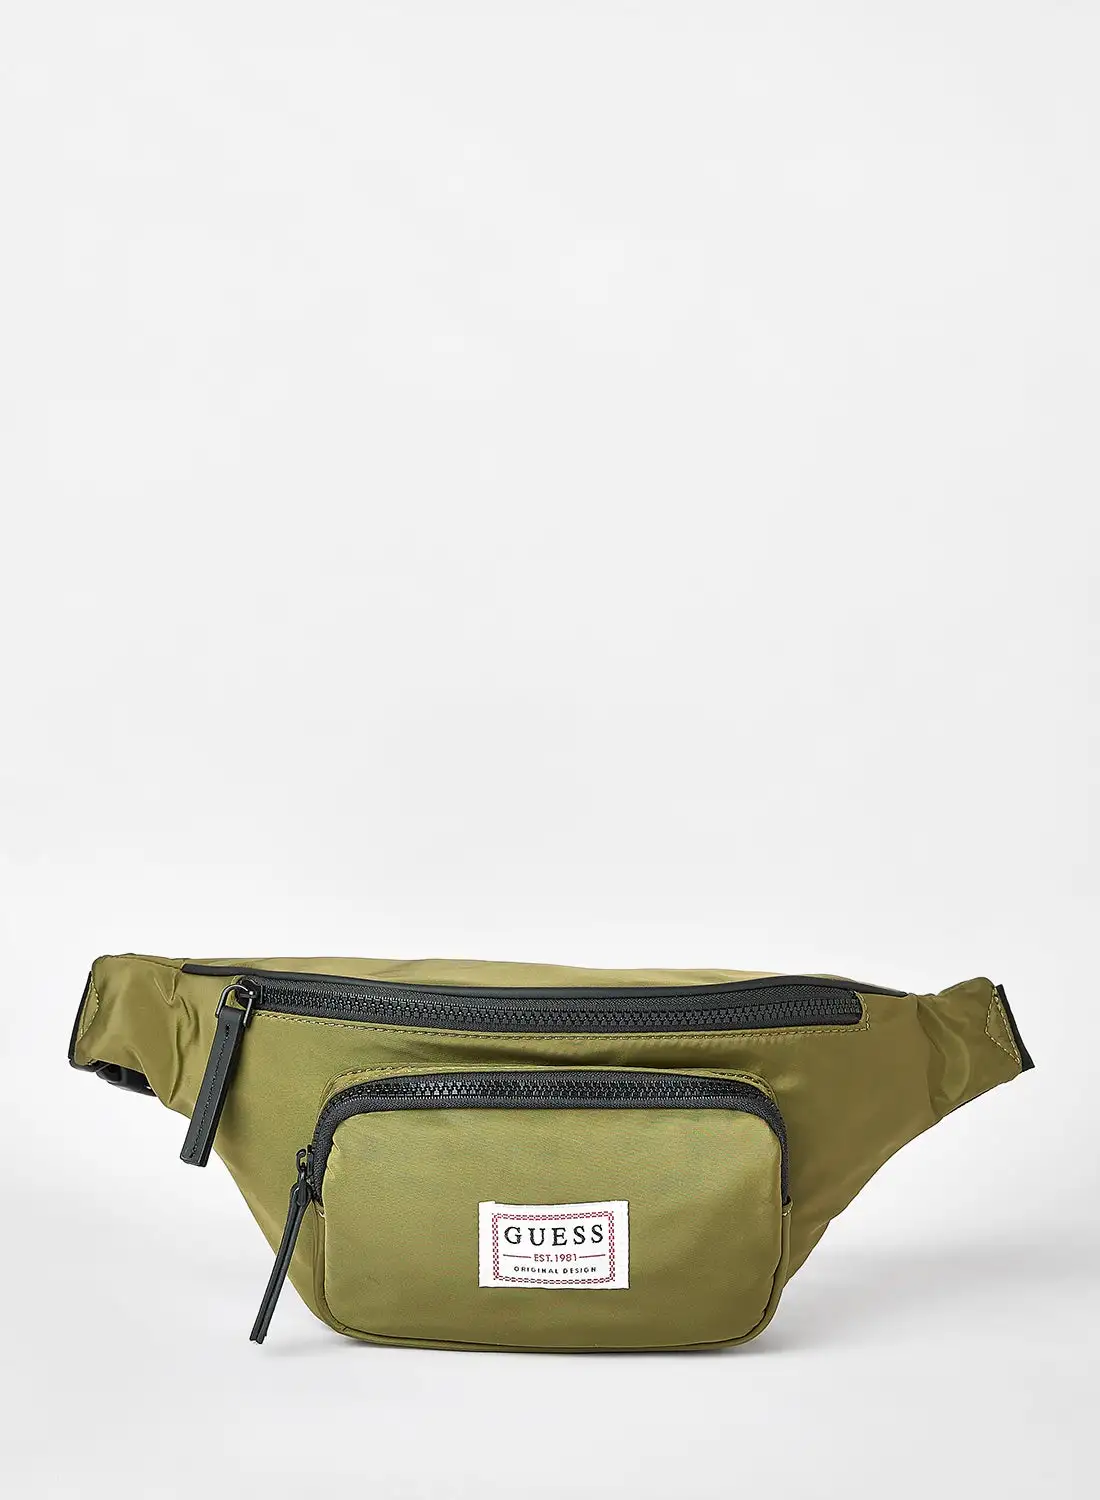 GUESS Logo Waist Pack Olive